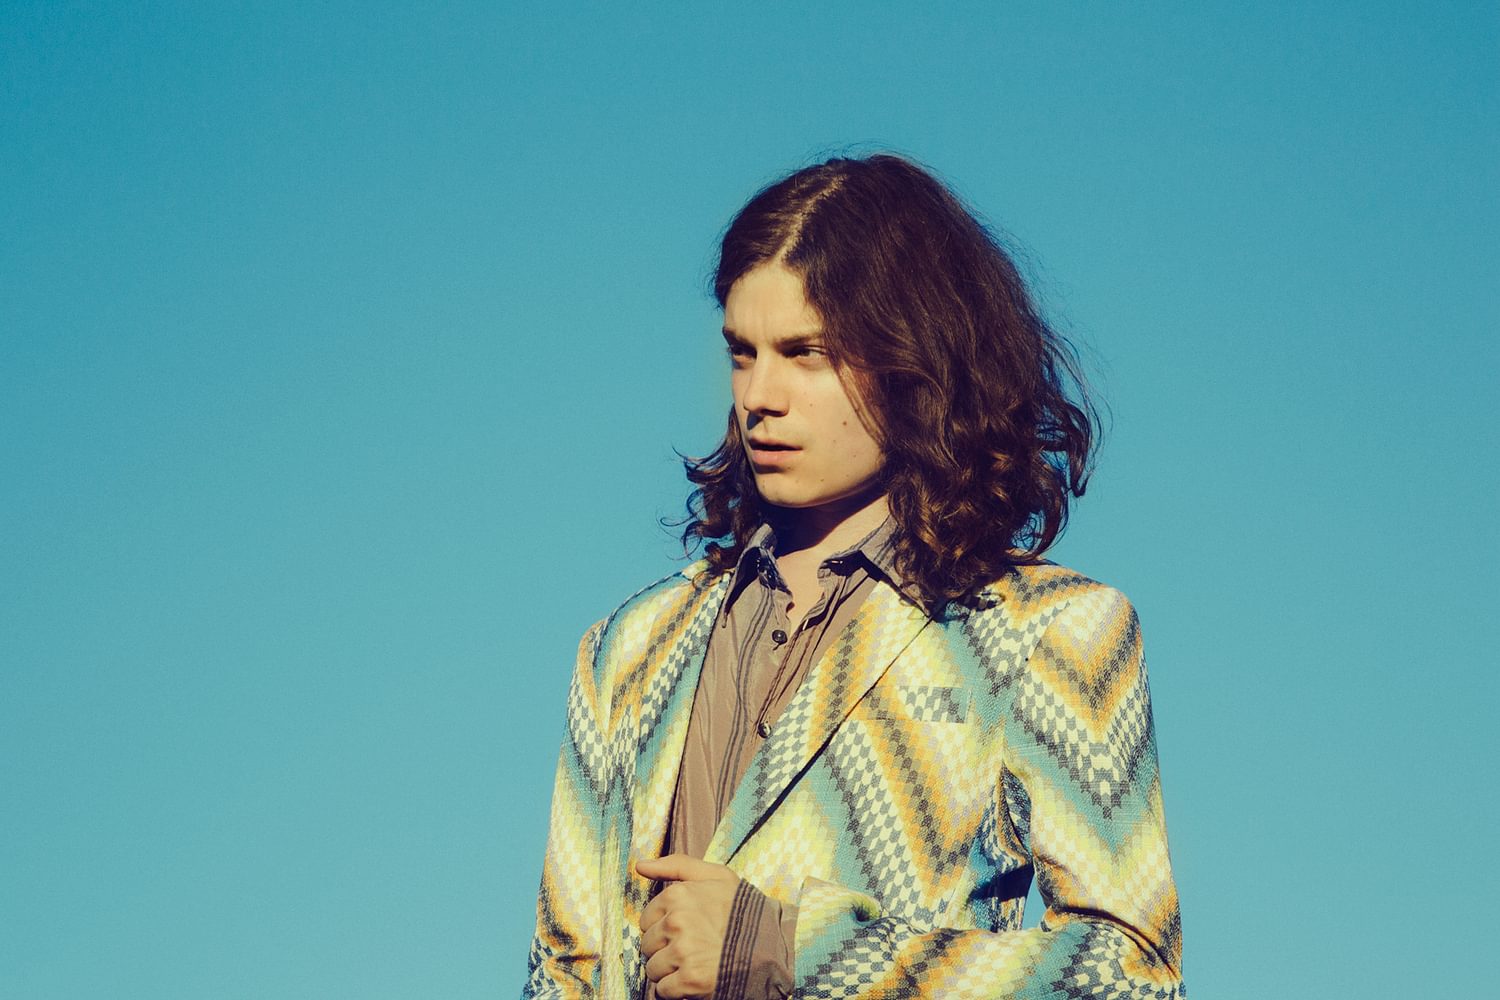 BØRNS: "There's a lot of room for being a pop star and still letting yourself get weird"